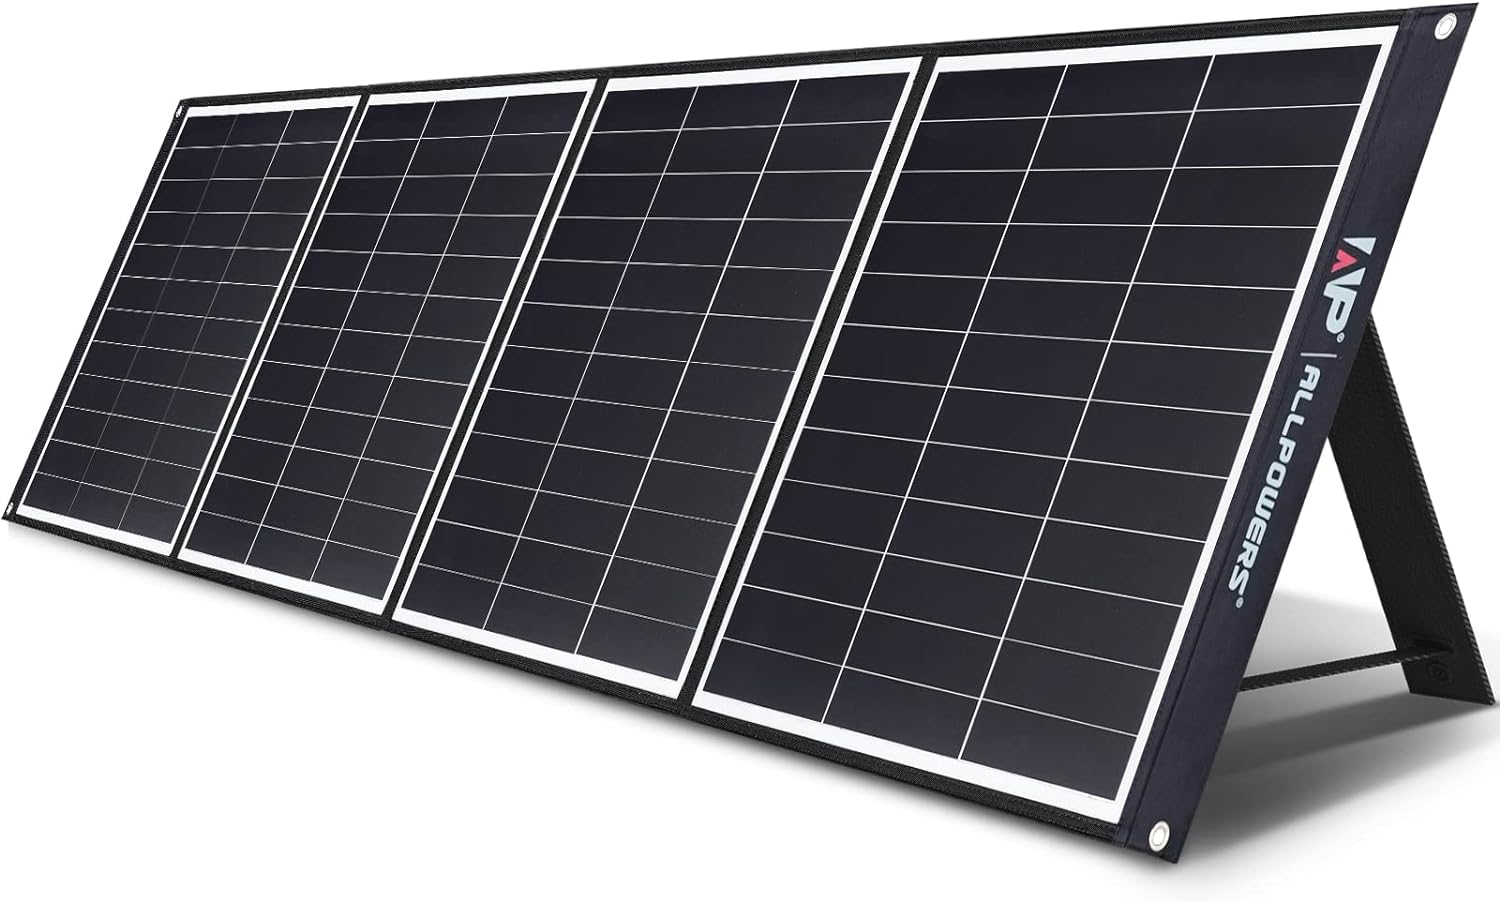 ALLPOWERS SP035 200W Portable Solar Panel Charger Monocrystalline Foldable Solar Panel Kit with MC-4 Output Solar Power Battery for RV Solar Generator Outdoor Camping Off Grid Van - ALLPOWERS SP035 200W Portable Solar Panel Charger Review